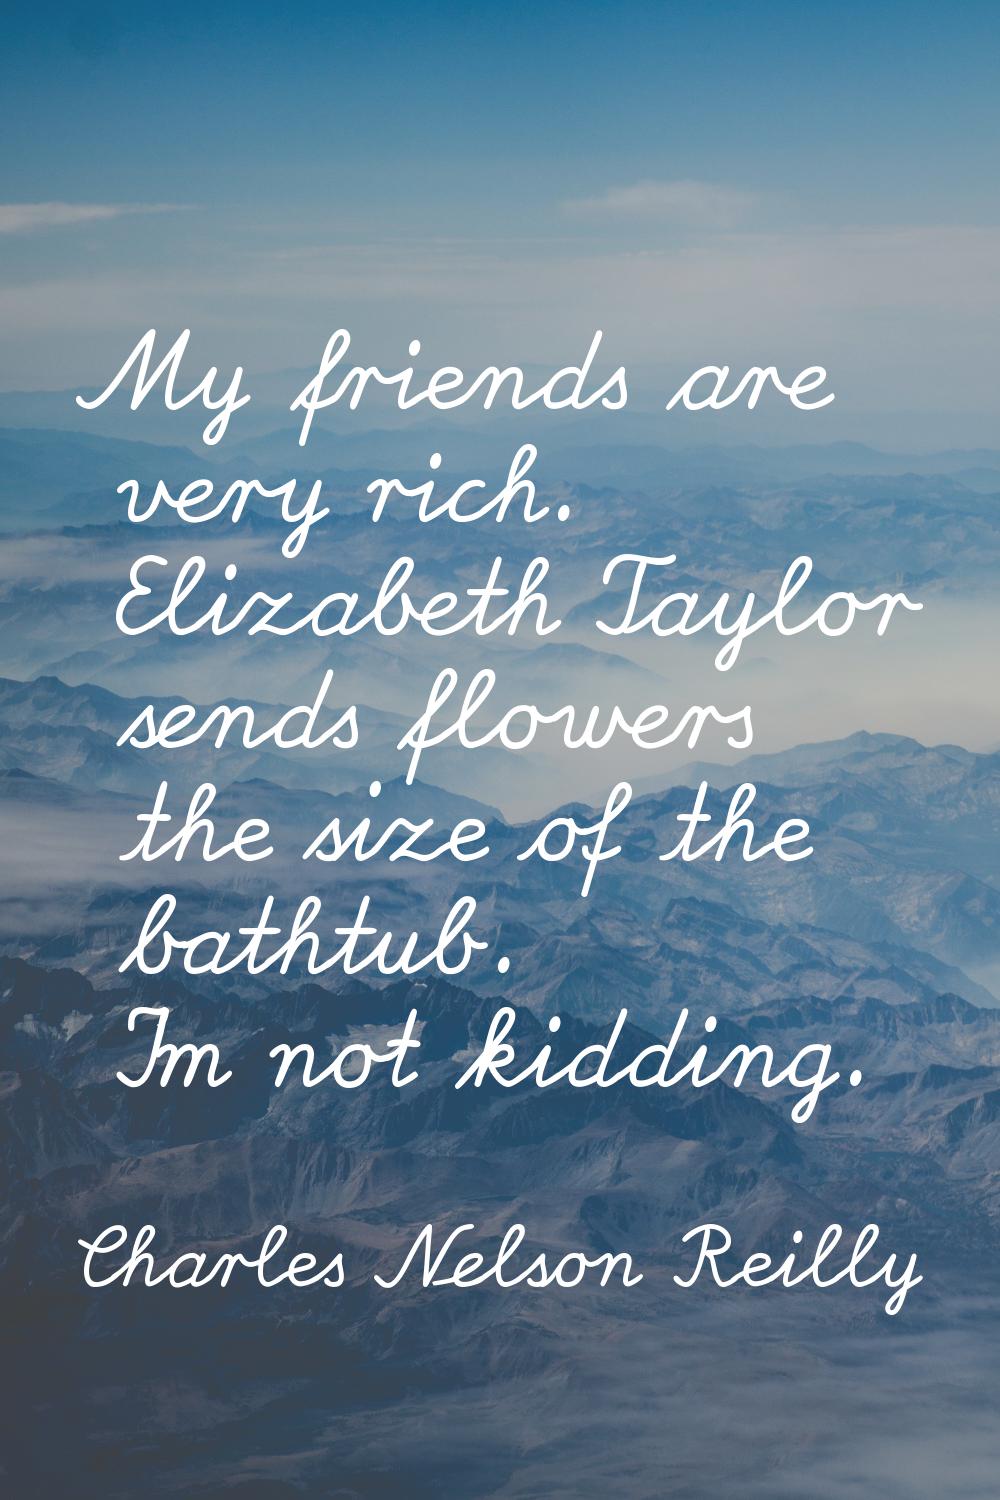 My friends are very rich. Elizabeth Taylor sends flowers the size of the bathtub. I'm not kidding.